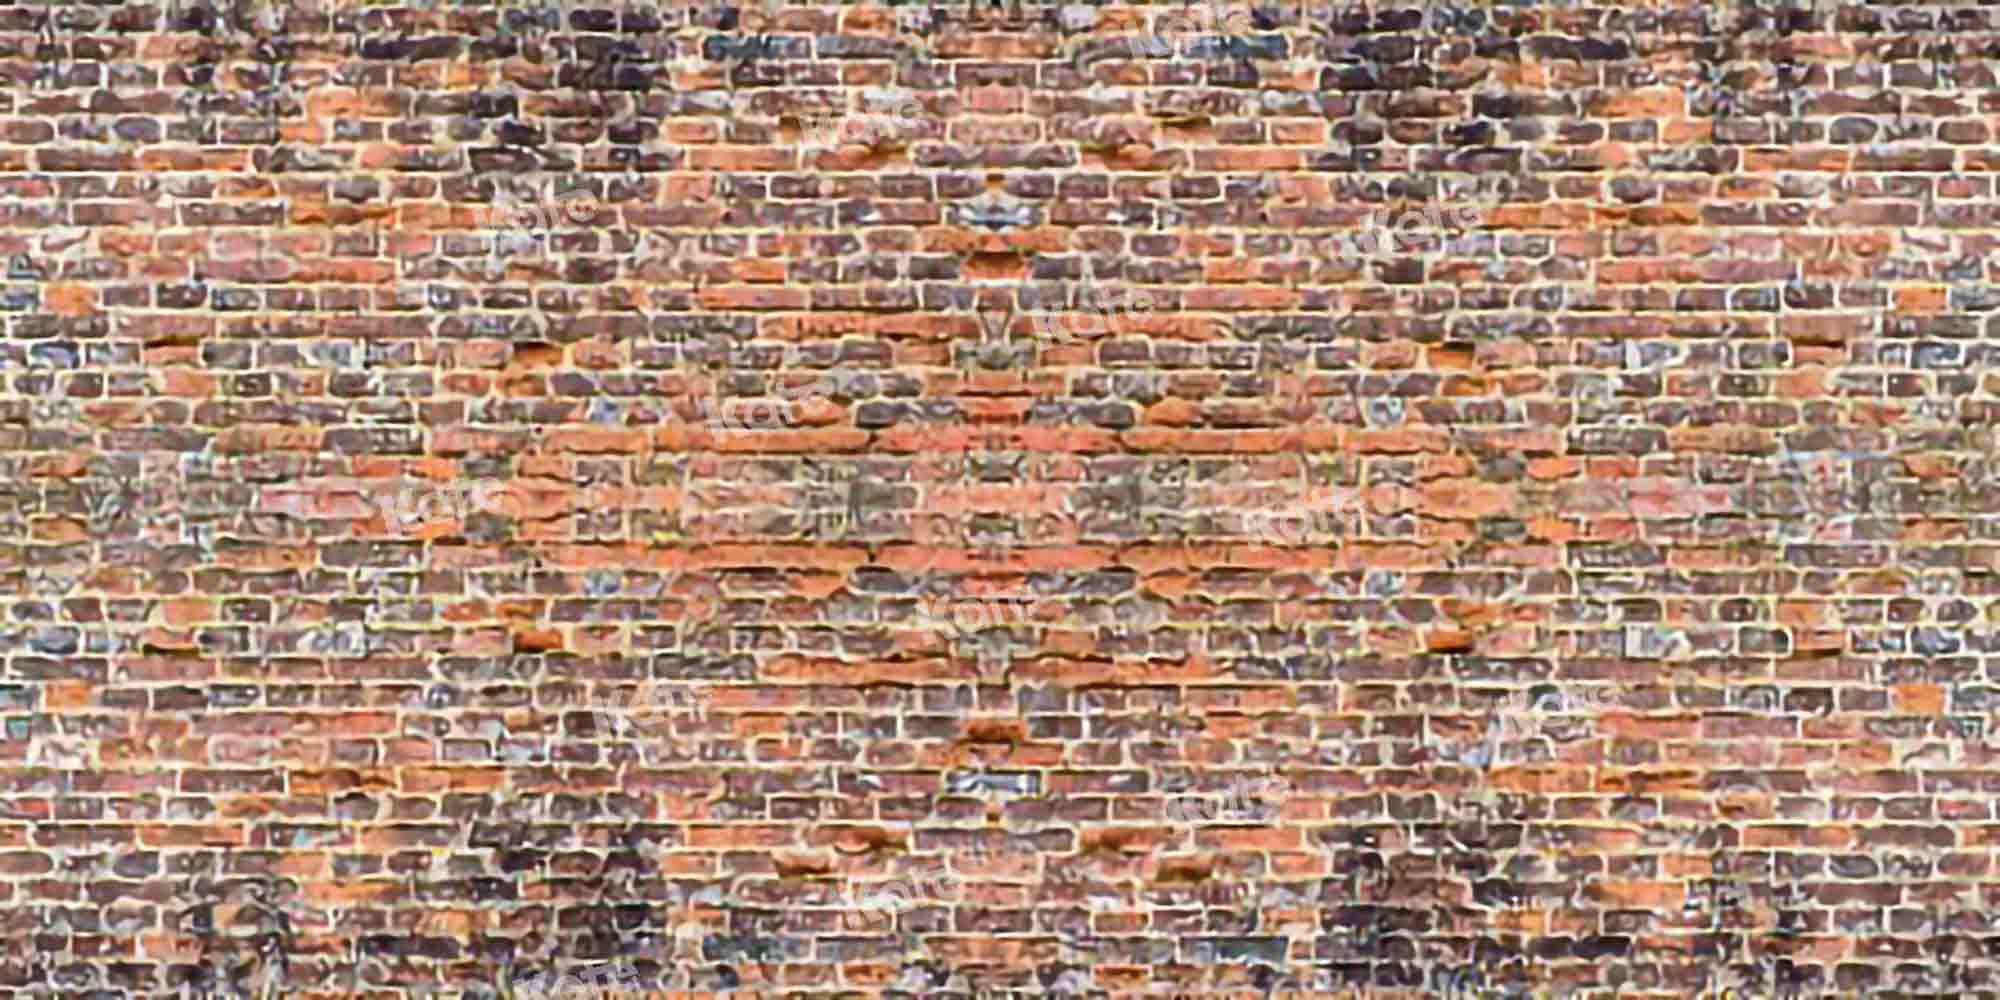 Kate Retro Old Brick Background for Photography Designed by Chain Photography - Kate Backdrop